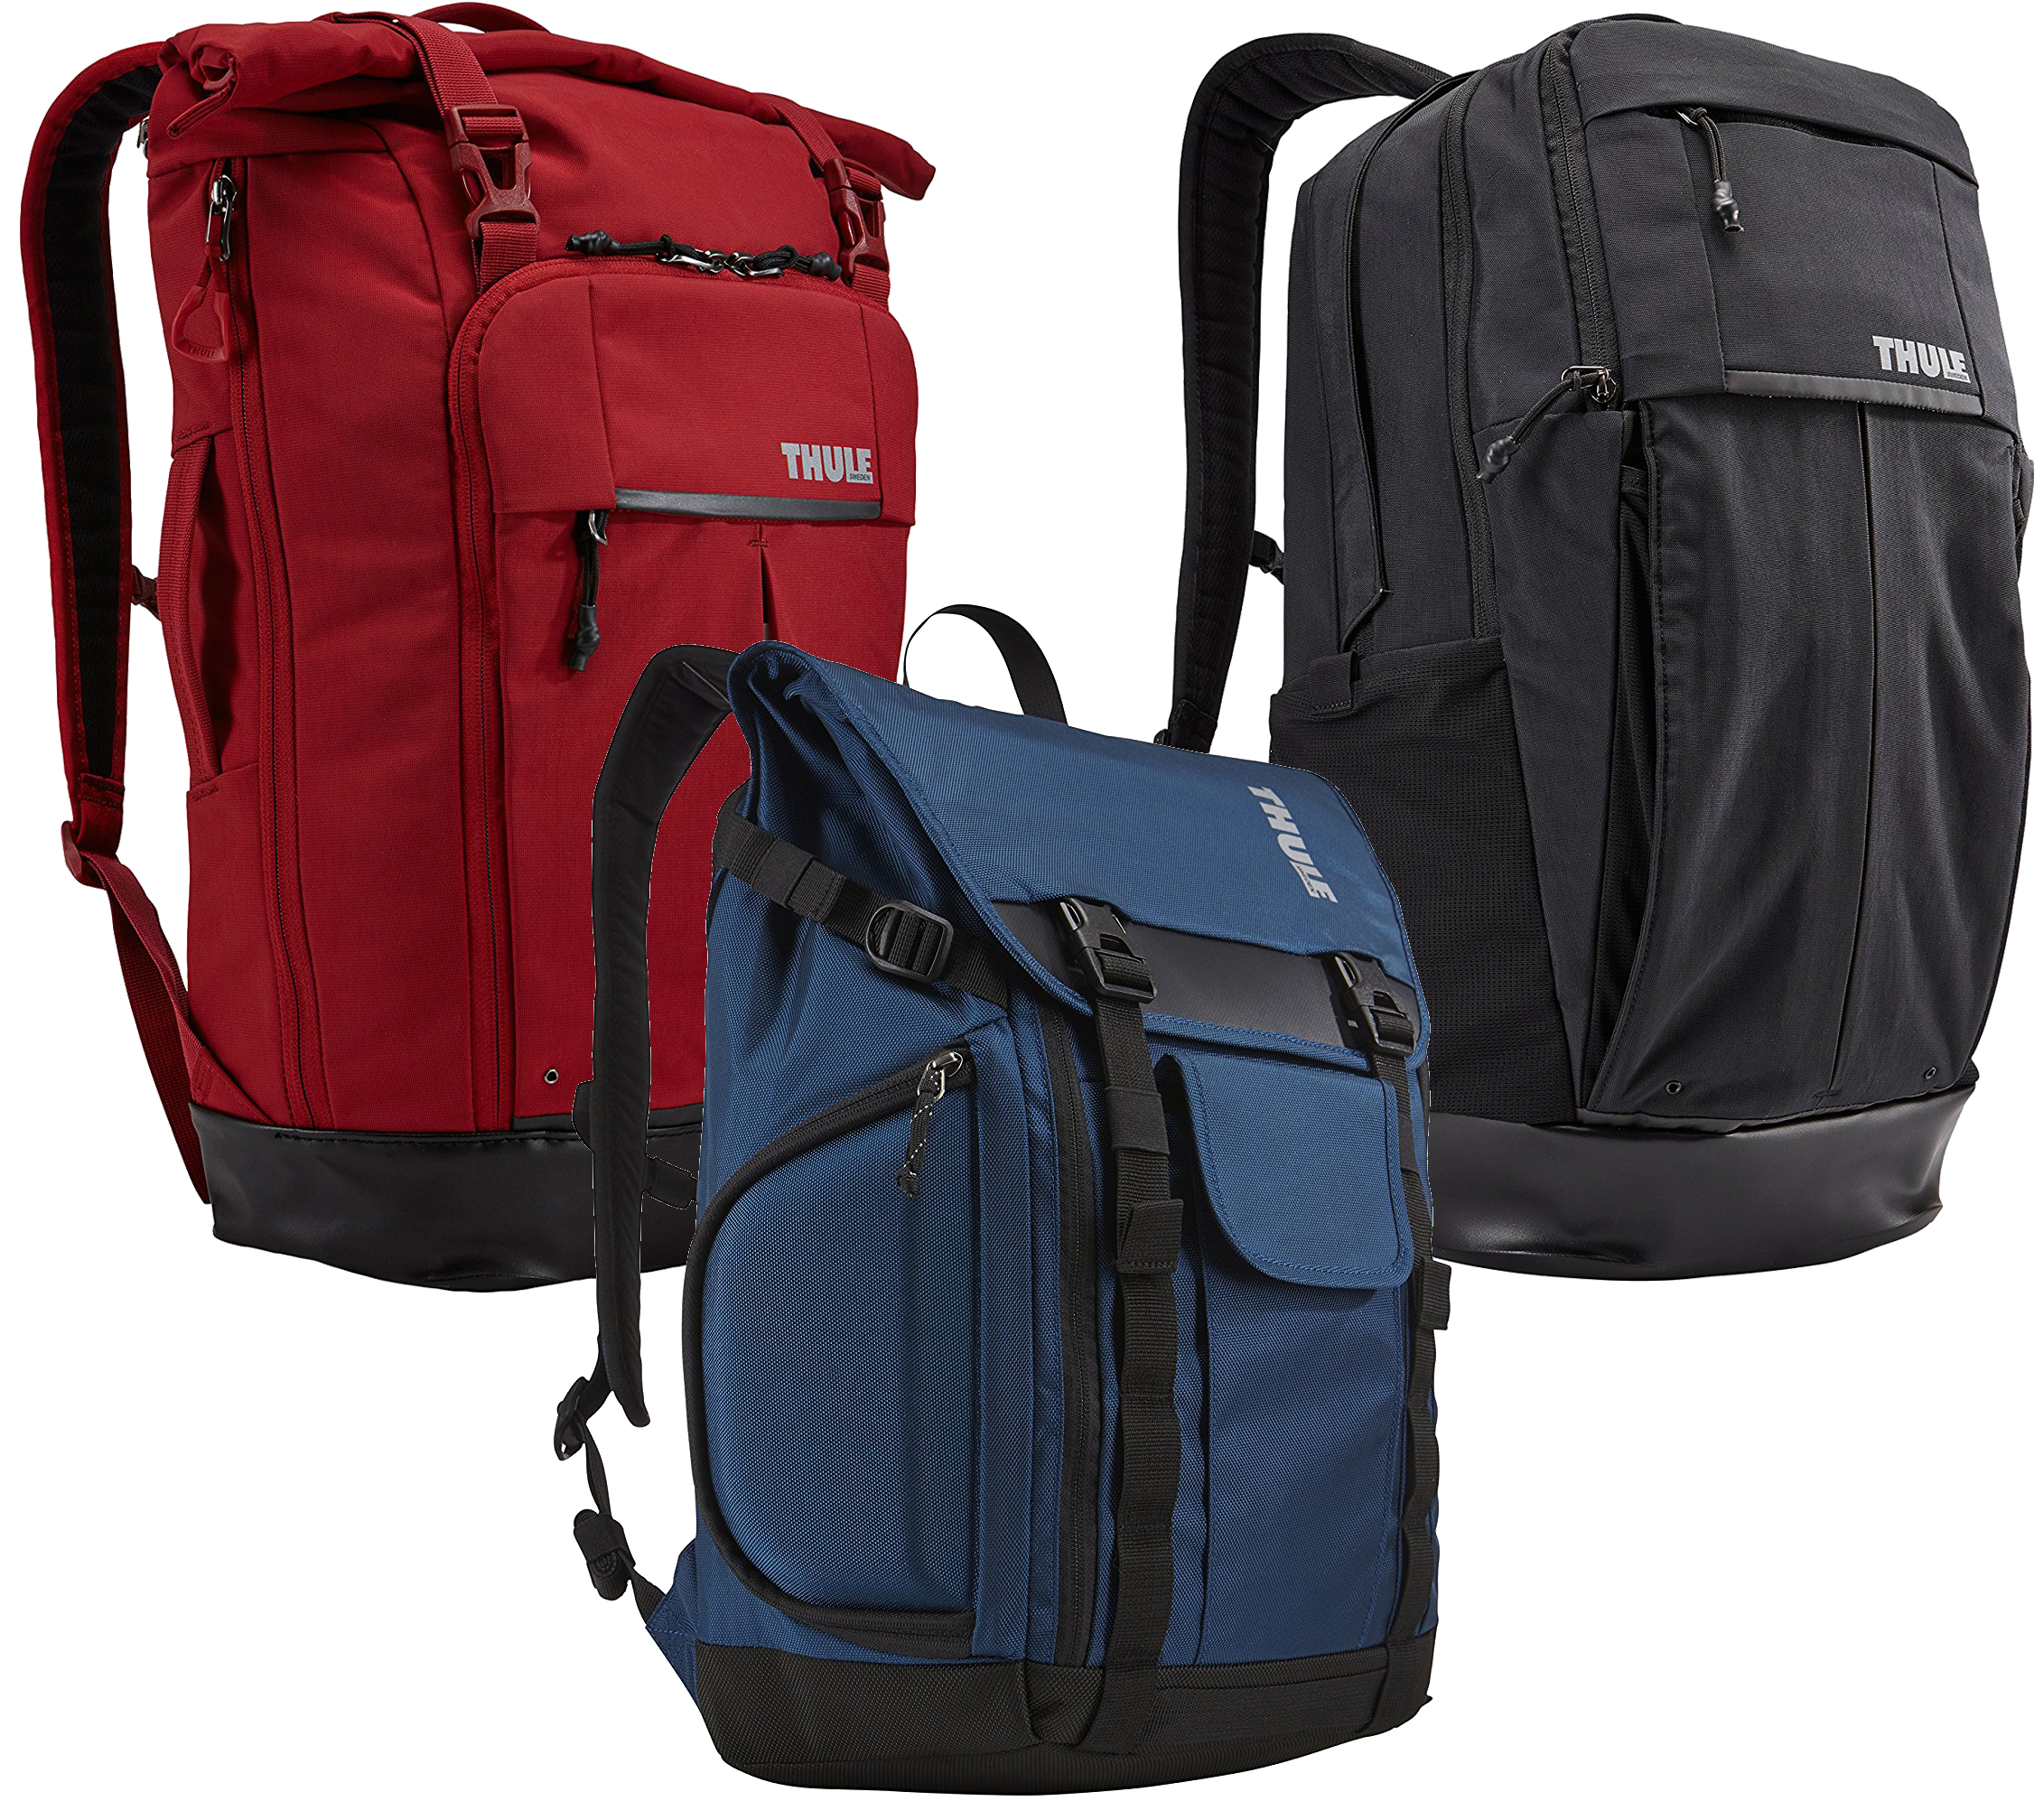 Today only: Thule backpacks for $34 shipped